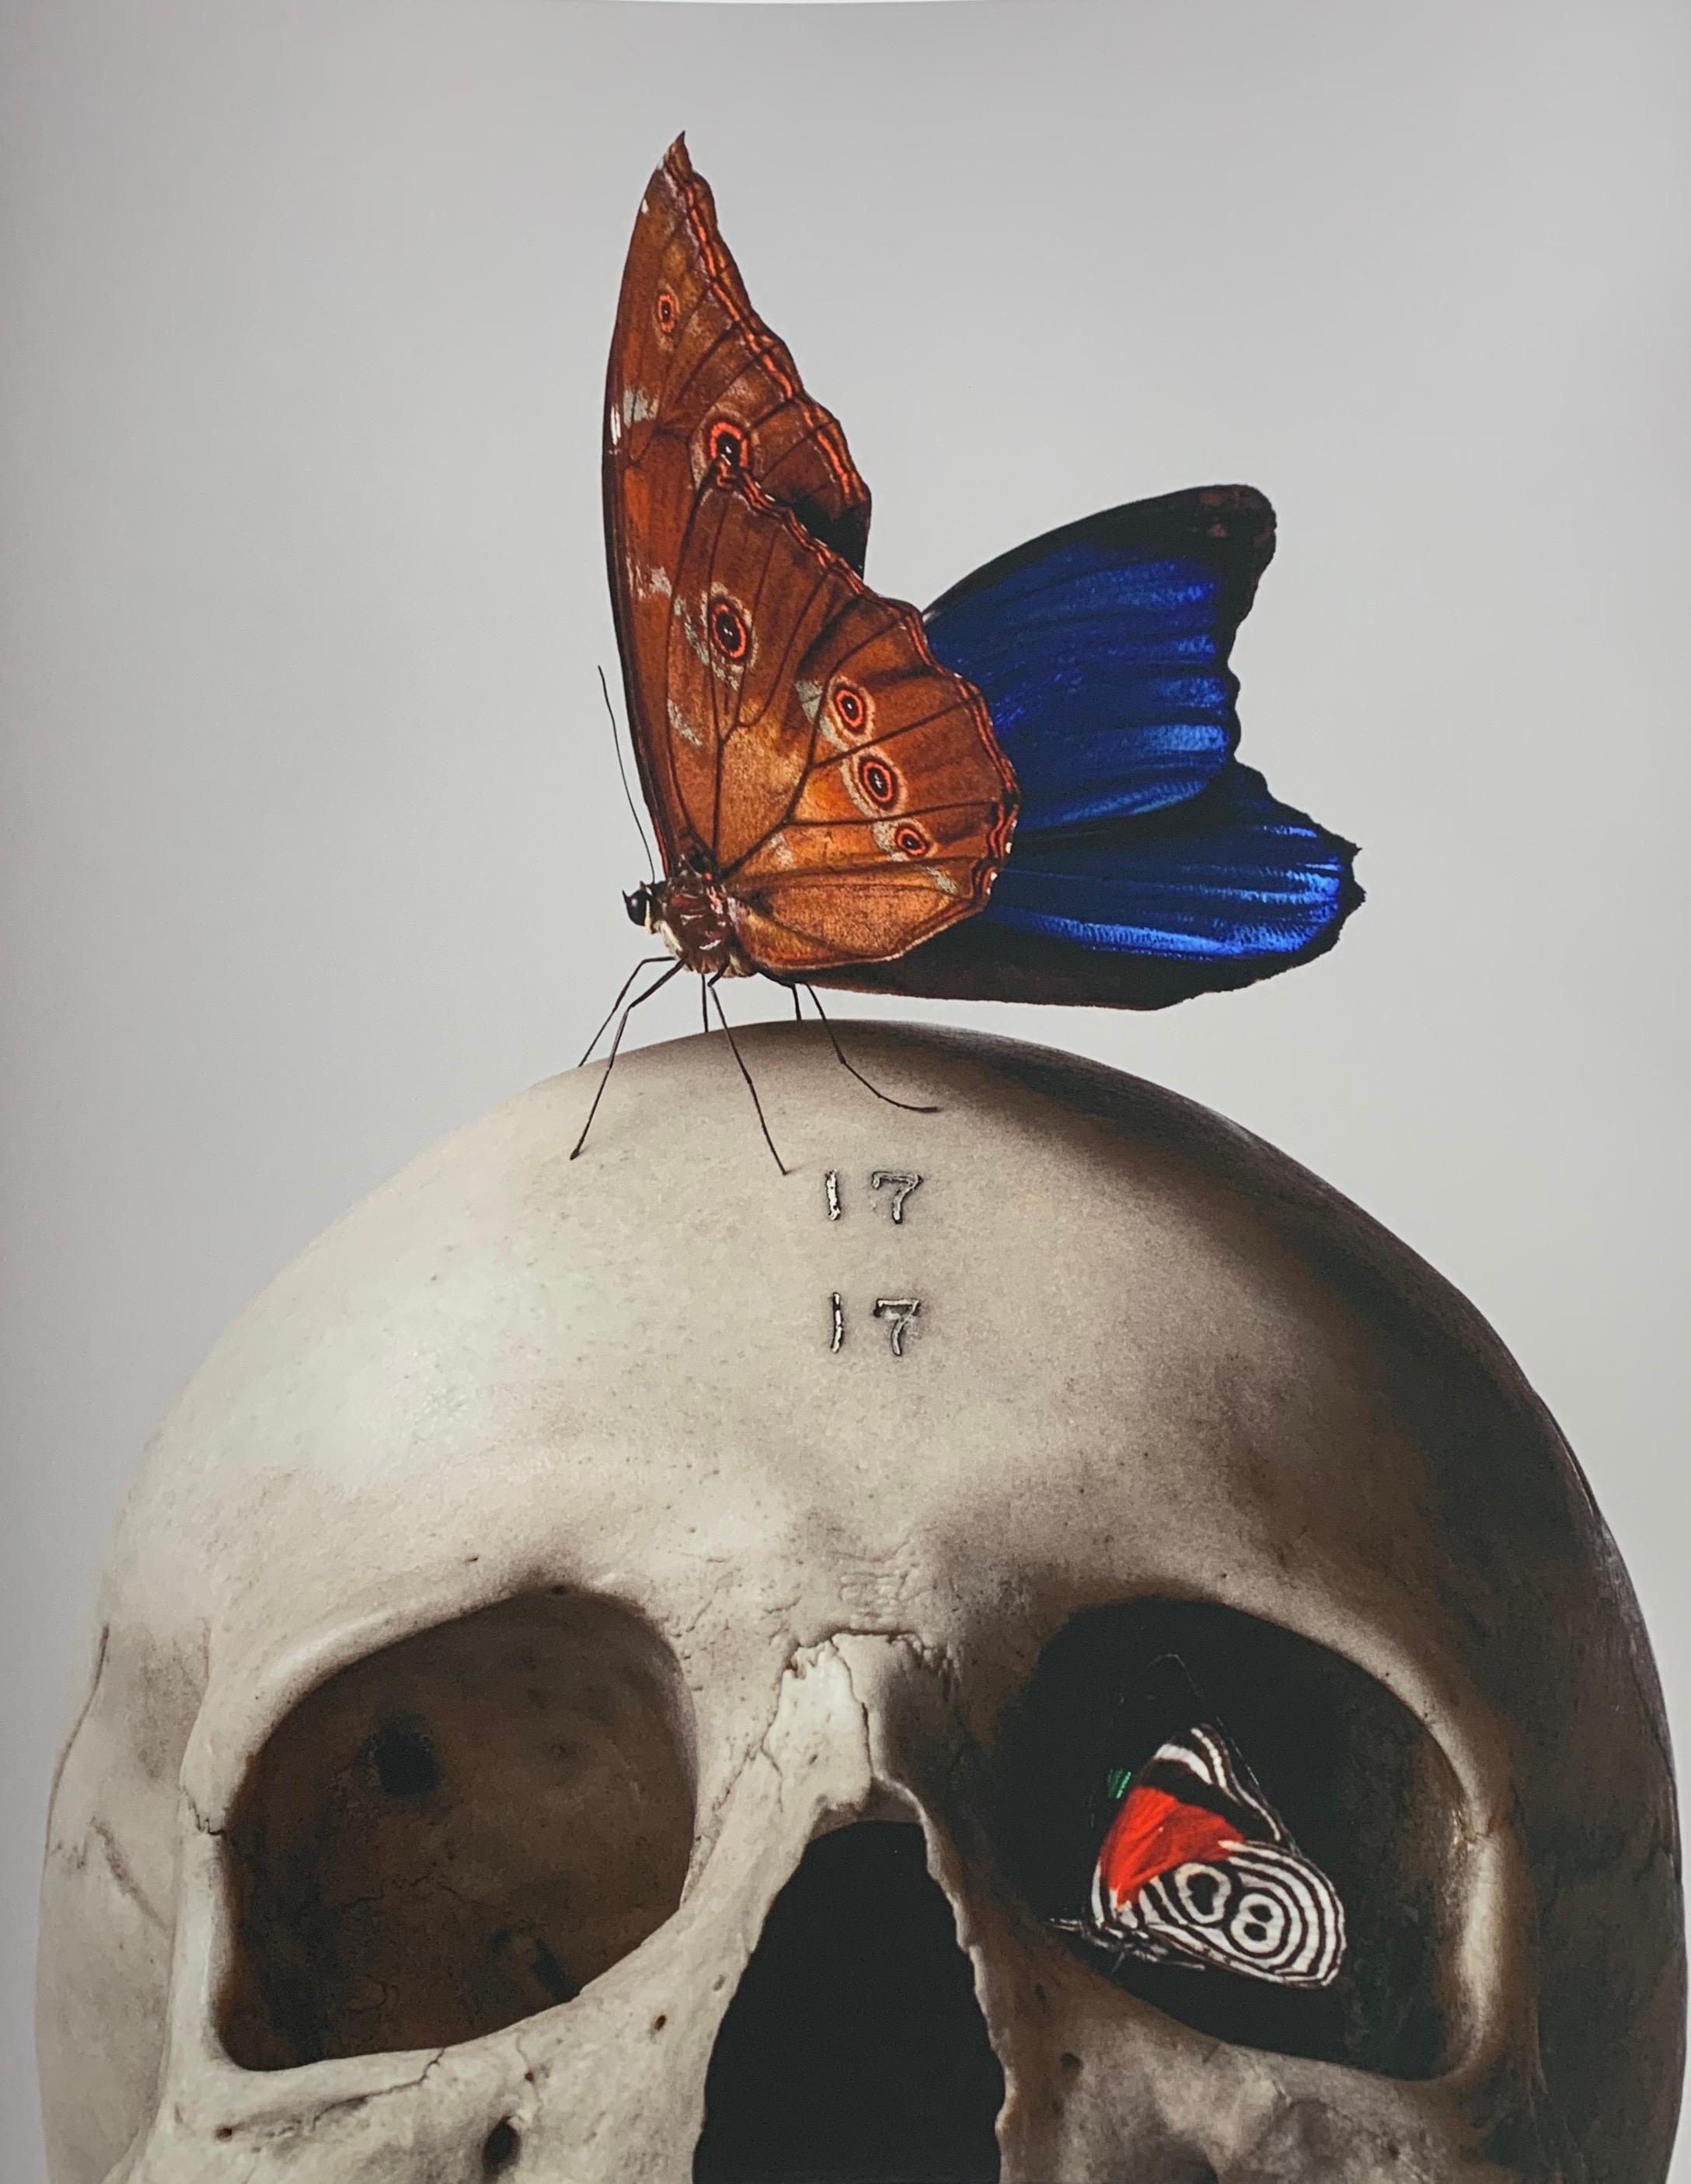 "Skull & Butterfly" beautifully blends striking colors with the contrast between a human skull and a taxidermied Blue Morpho Menalaus butterfly.  The photograph exhibits stunning detail and color throughout and is a conversation starter in any home